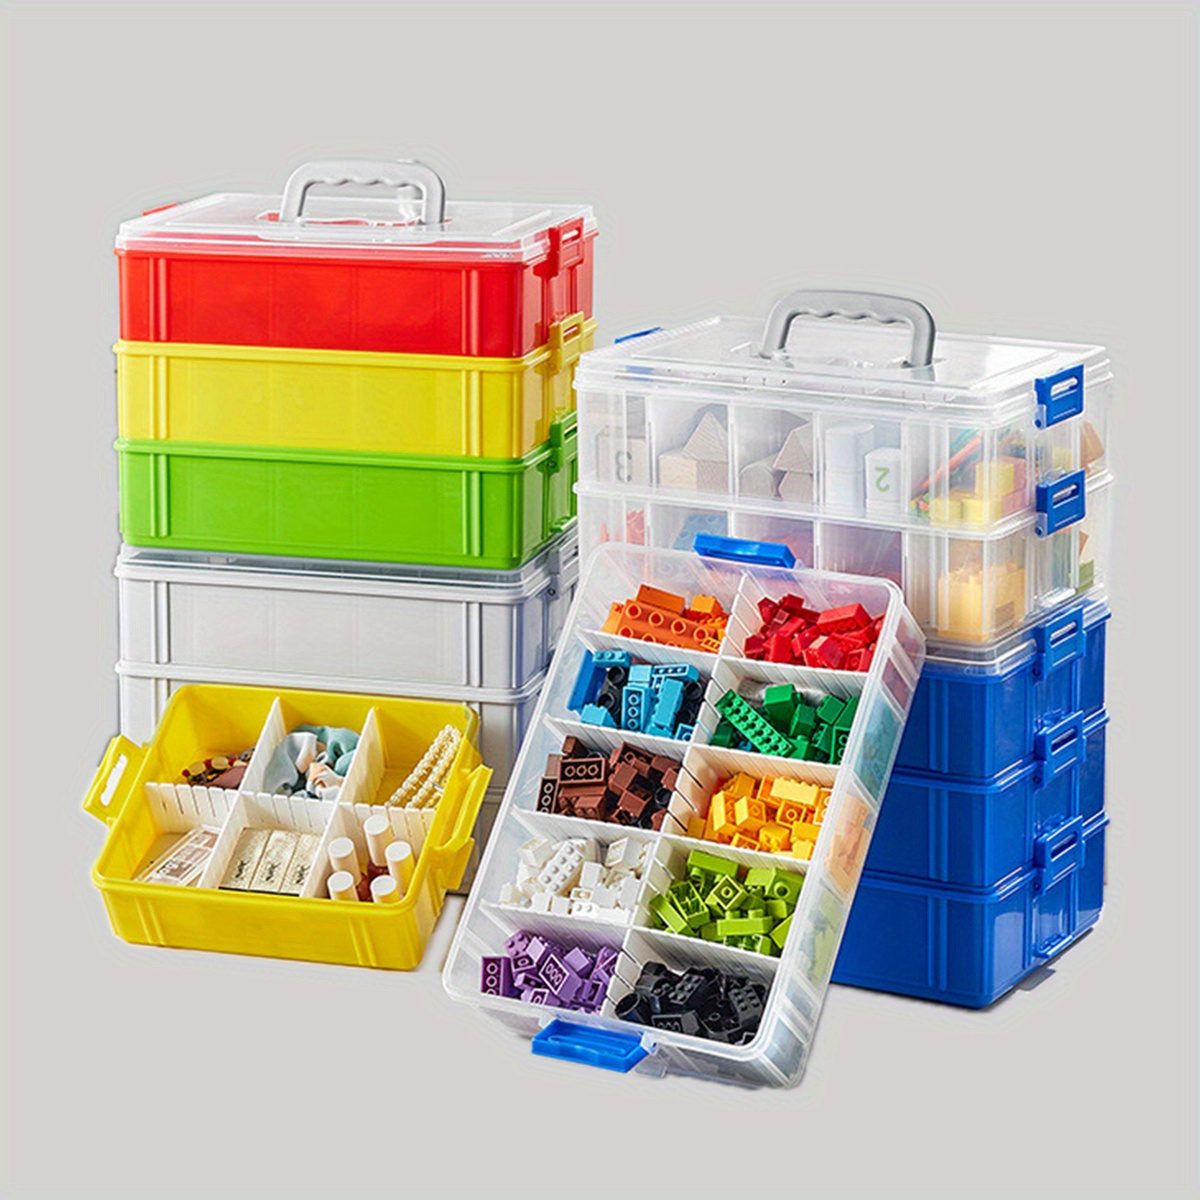 1pc Plastic Clear Storage Box, Craft Organizer Storage Box, 18-Grid  Transparent Bead Organizer, Storage Container With Adjustable Dividers,  Finishing